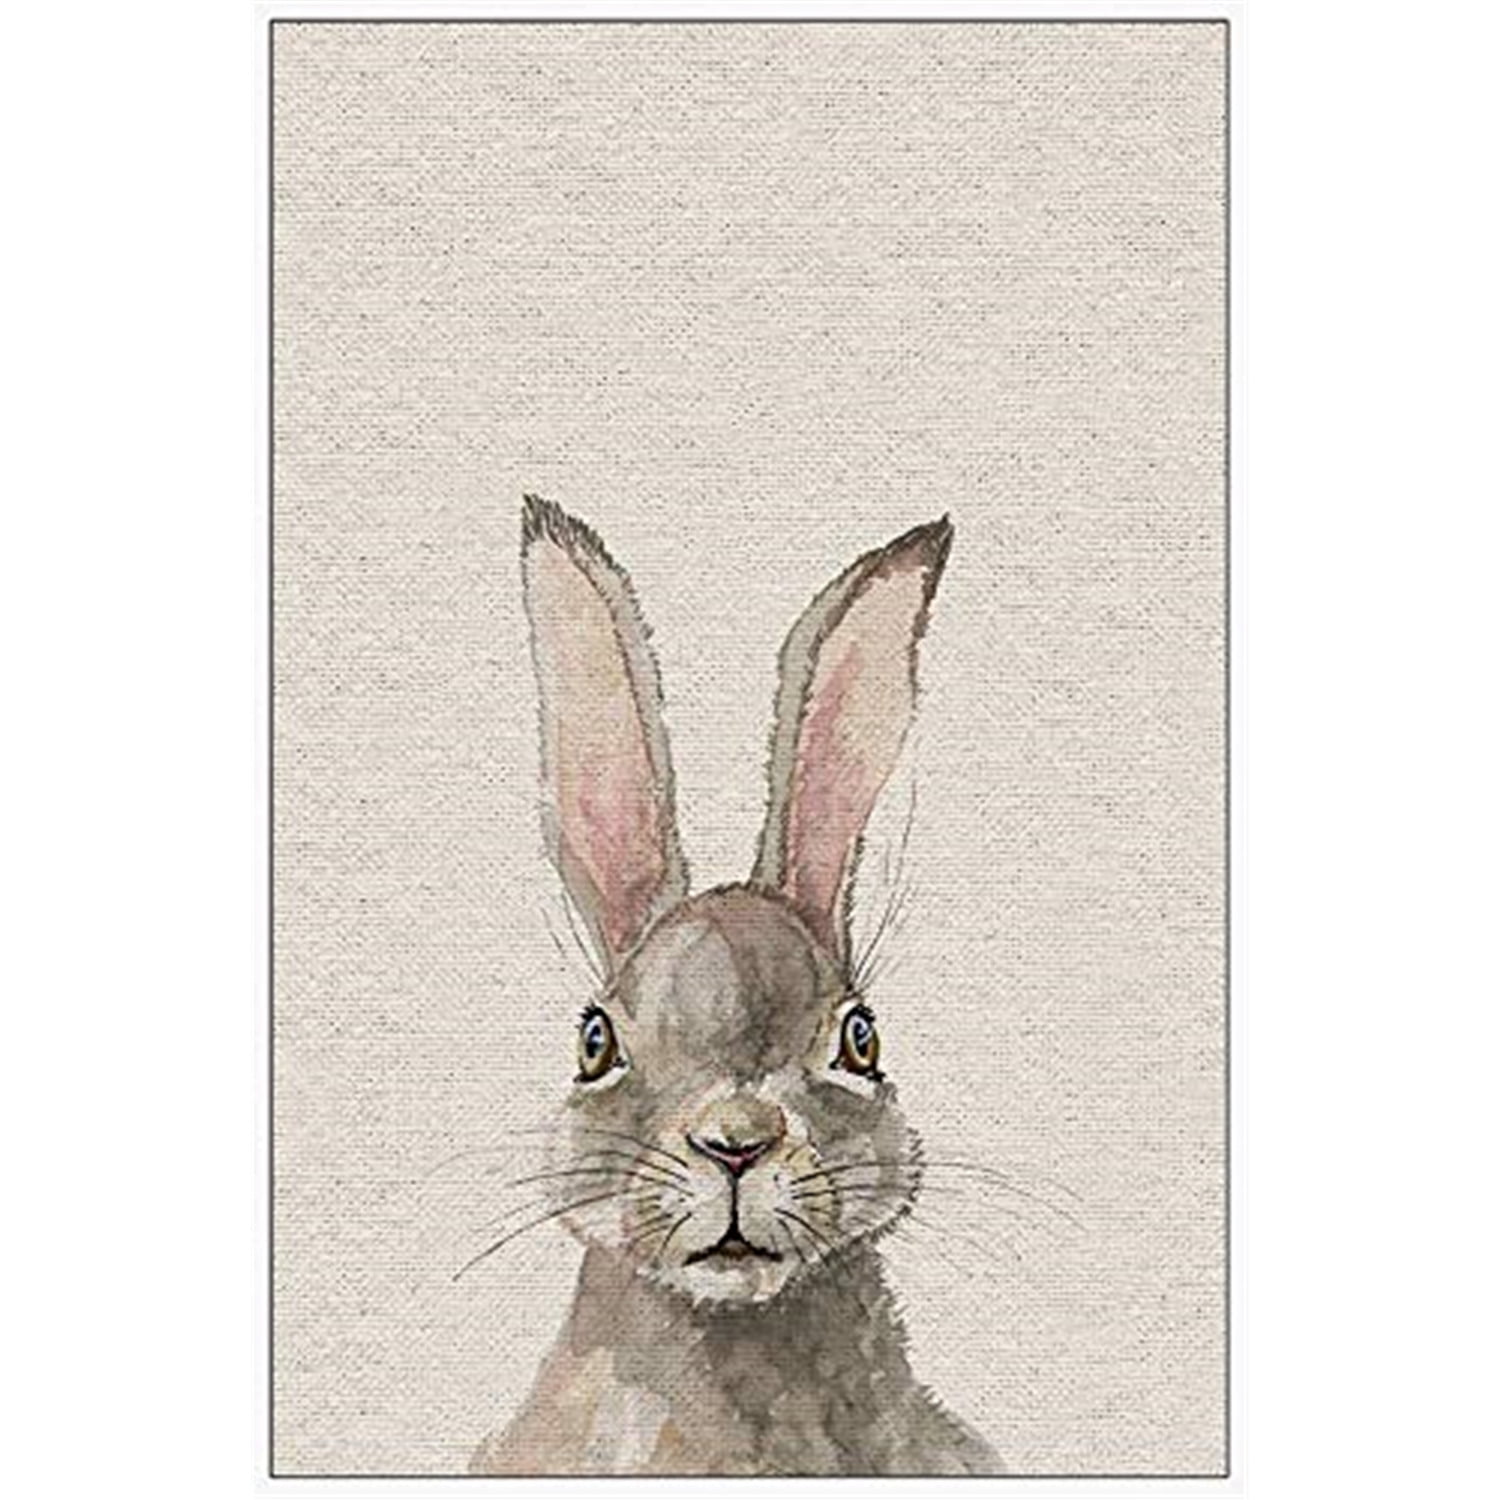 Bunny Eyes II Floater Framed Painting Print on Canvas